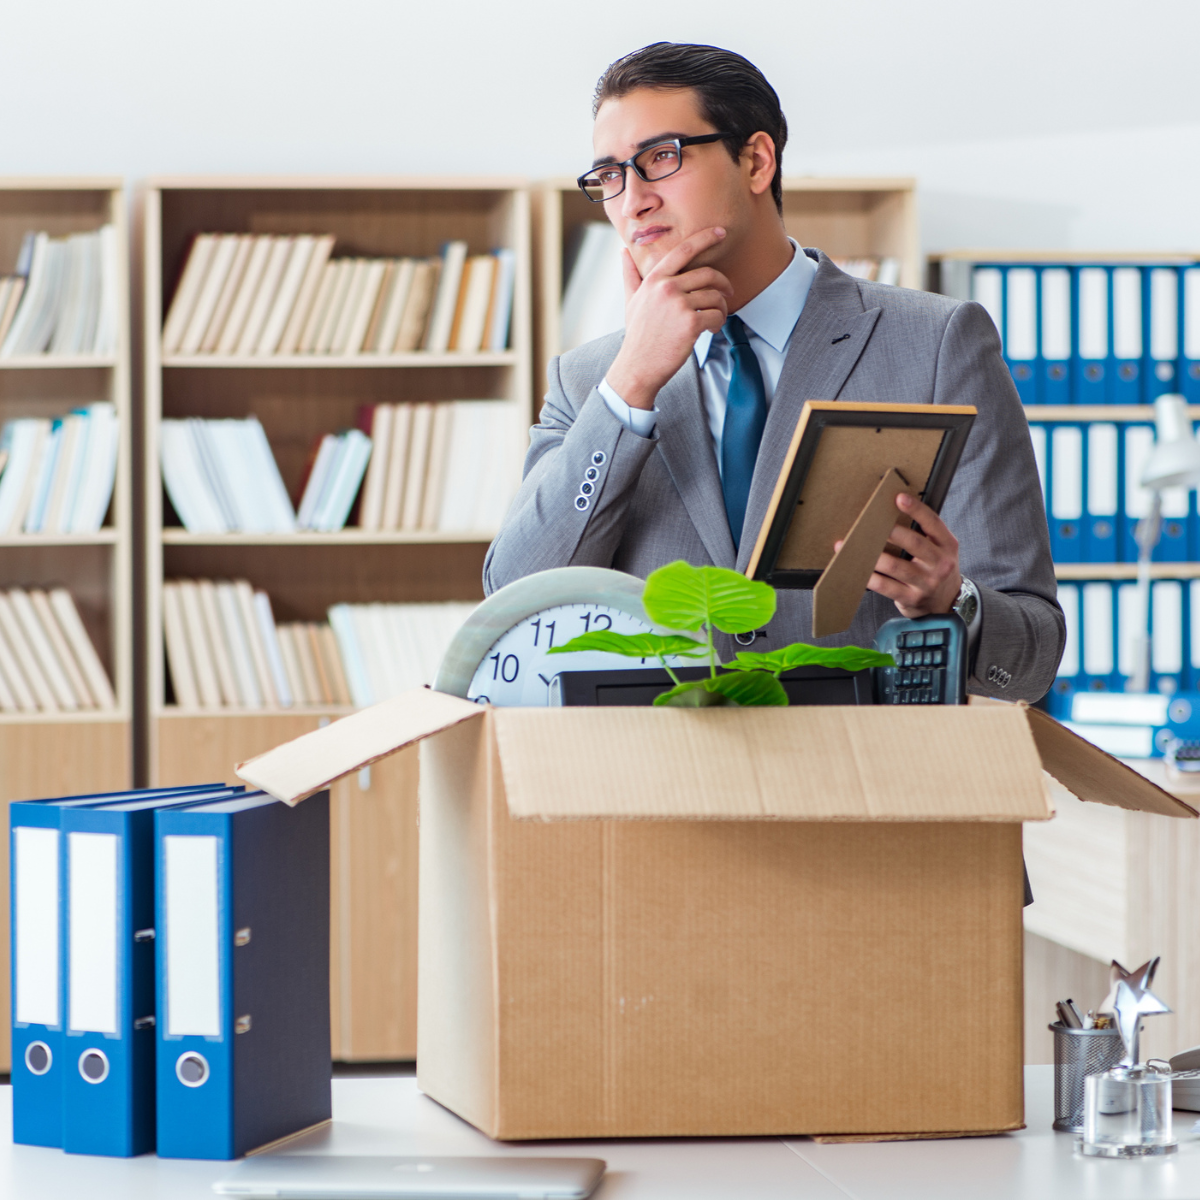 5 Tips for Downsizing Your Office